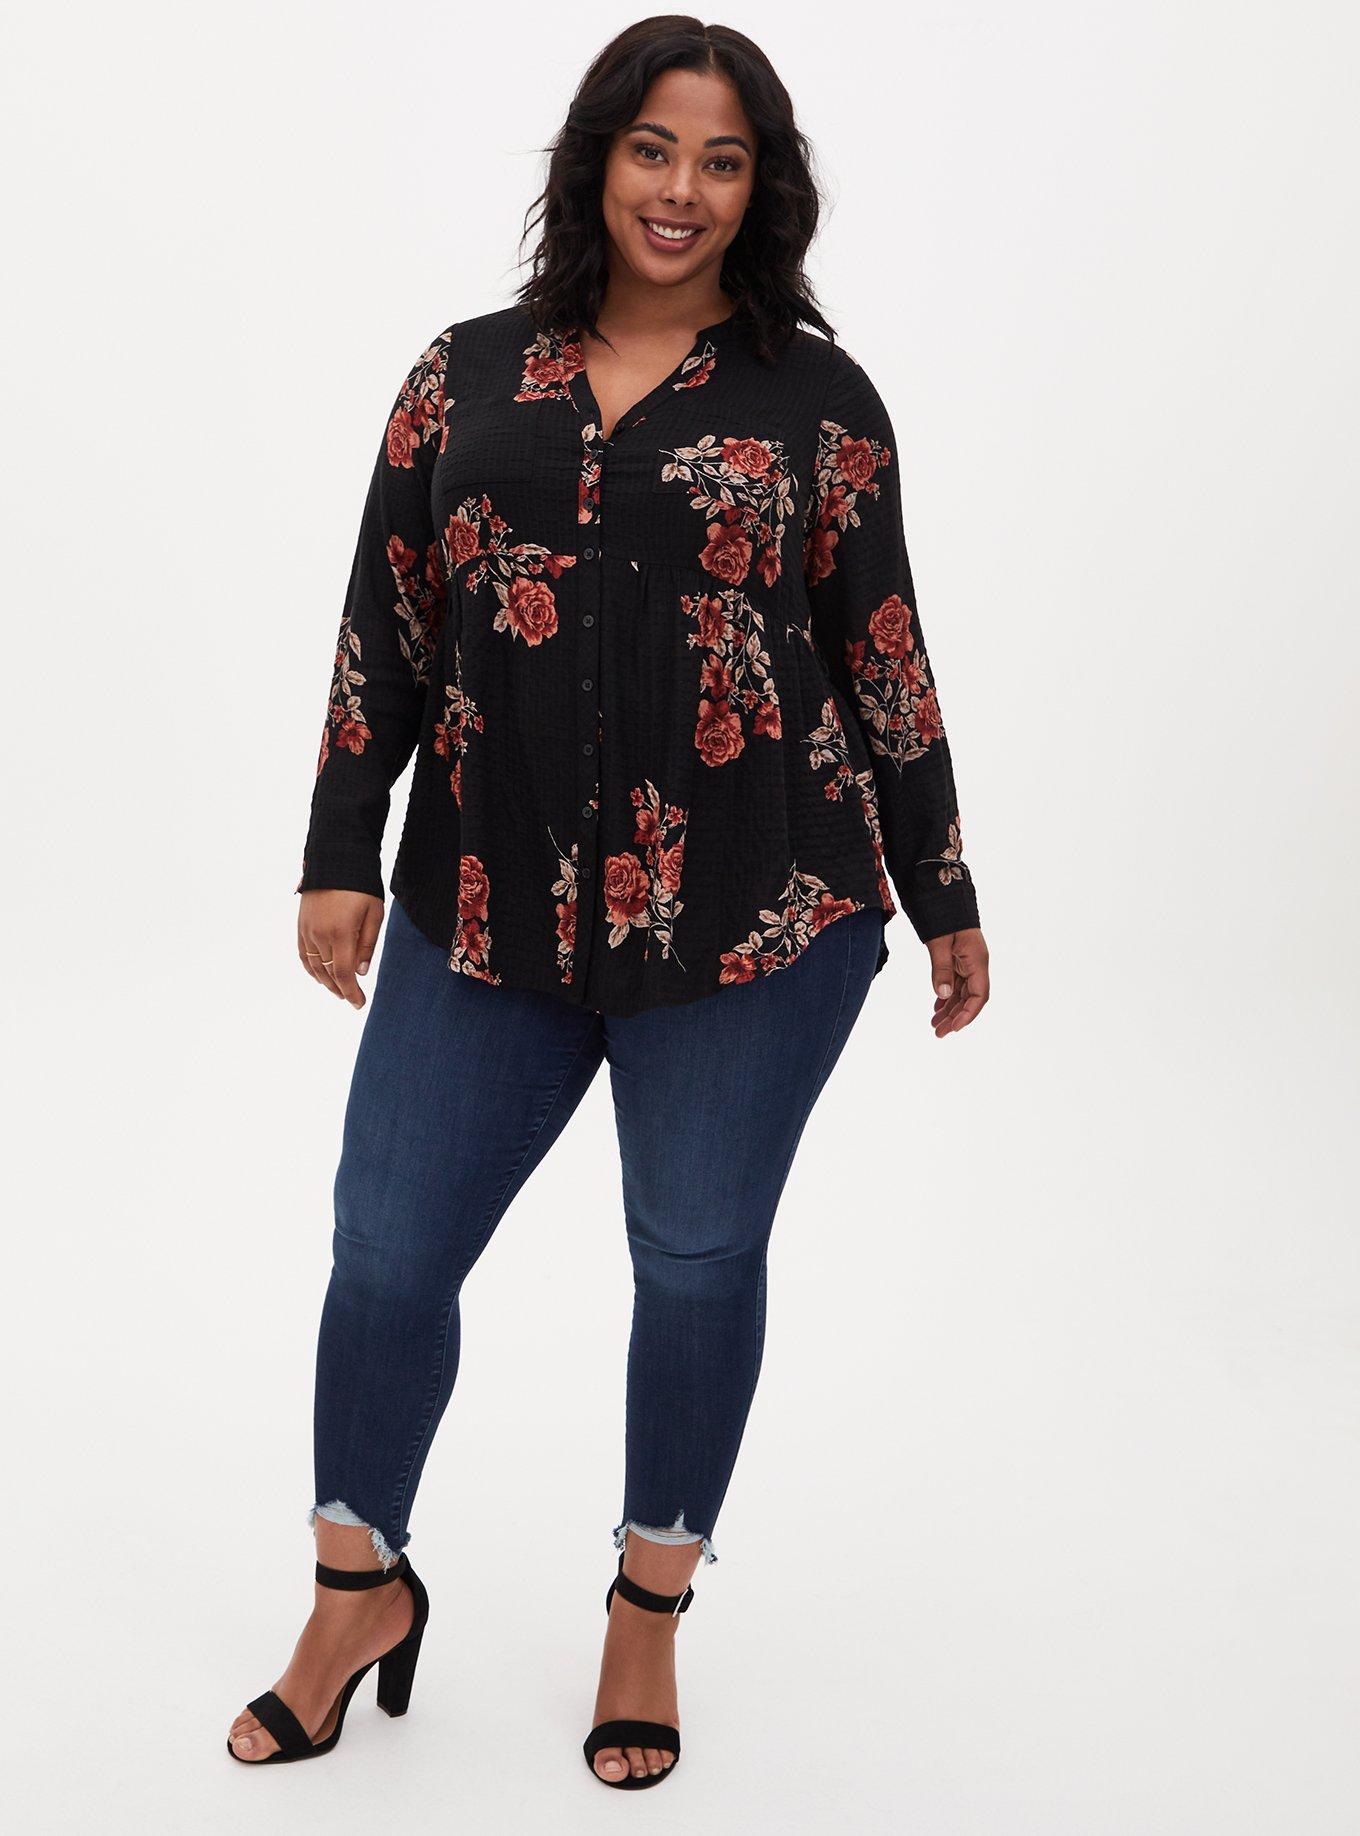 Torrid Plus Size Women's Clothing for sale in Barker Heights